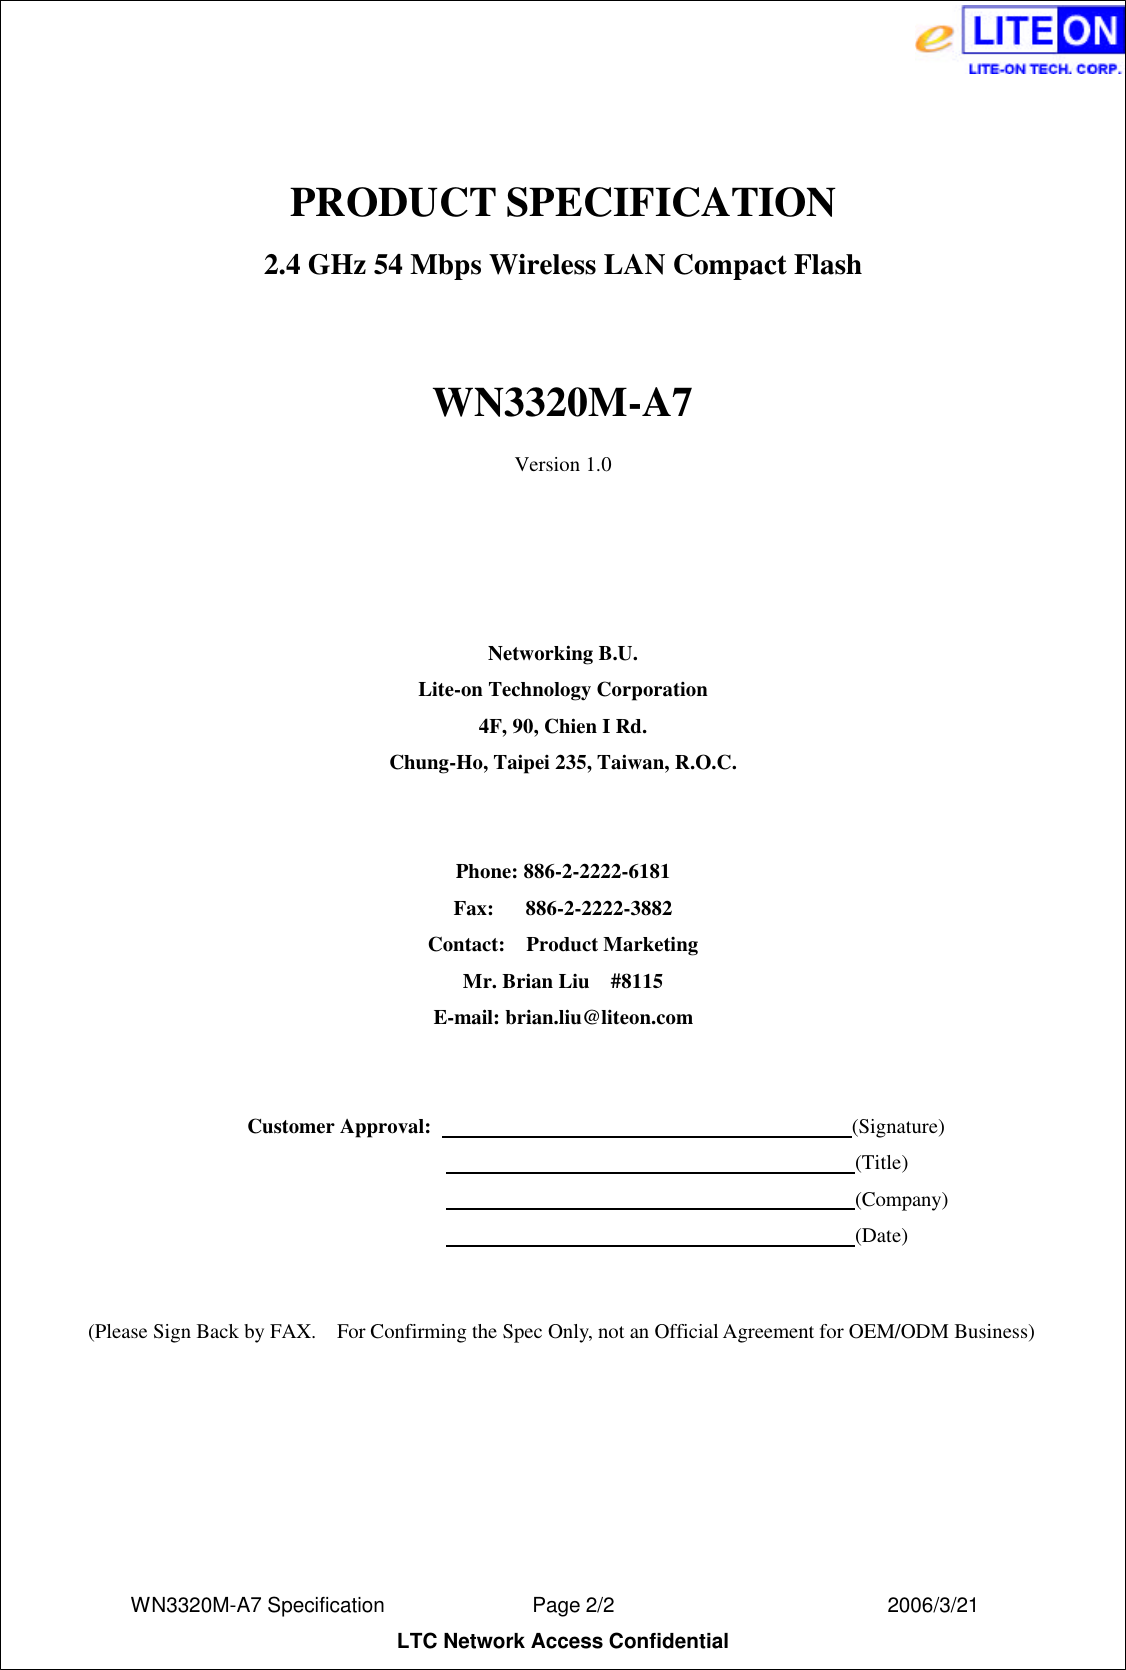  WN3320M-A7 Specification               Page 2/2                          2006/3/21 LTC Network Access Confidential  PRODUCT SPECIFICATION 2.4 GHz 54 Mbps Wireless LAN Compact Flash  WN3320M-A7 Version 1.0     Networking B.U. Lite-on Technology Corporation 4F, 90, Chien I Rd. Chung-Ho, Taipei 235, Taiwan, R.O.C.   Phone: 886-2-2222-6181 Fax:   886-2-2222-3882 Contact:  Product Marketing Mr. Brian Liu  #8115 E-mail: brian.liu@liteon.com    Customer Approval:                                          (Signature)                                                                      (Title)                                                                      (Company)                                                                      (Date)   (Please Sign Back by FAX.  For Confirming the Spec Only, not an Official Agreement for OEM/ODM Business) 